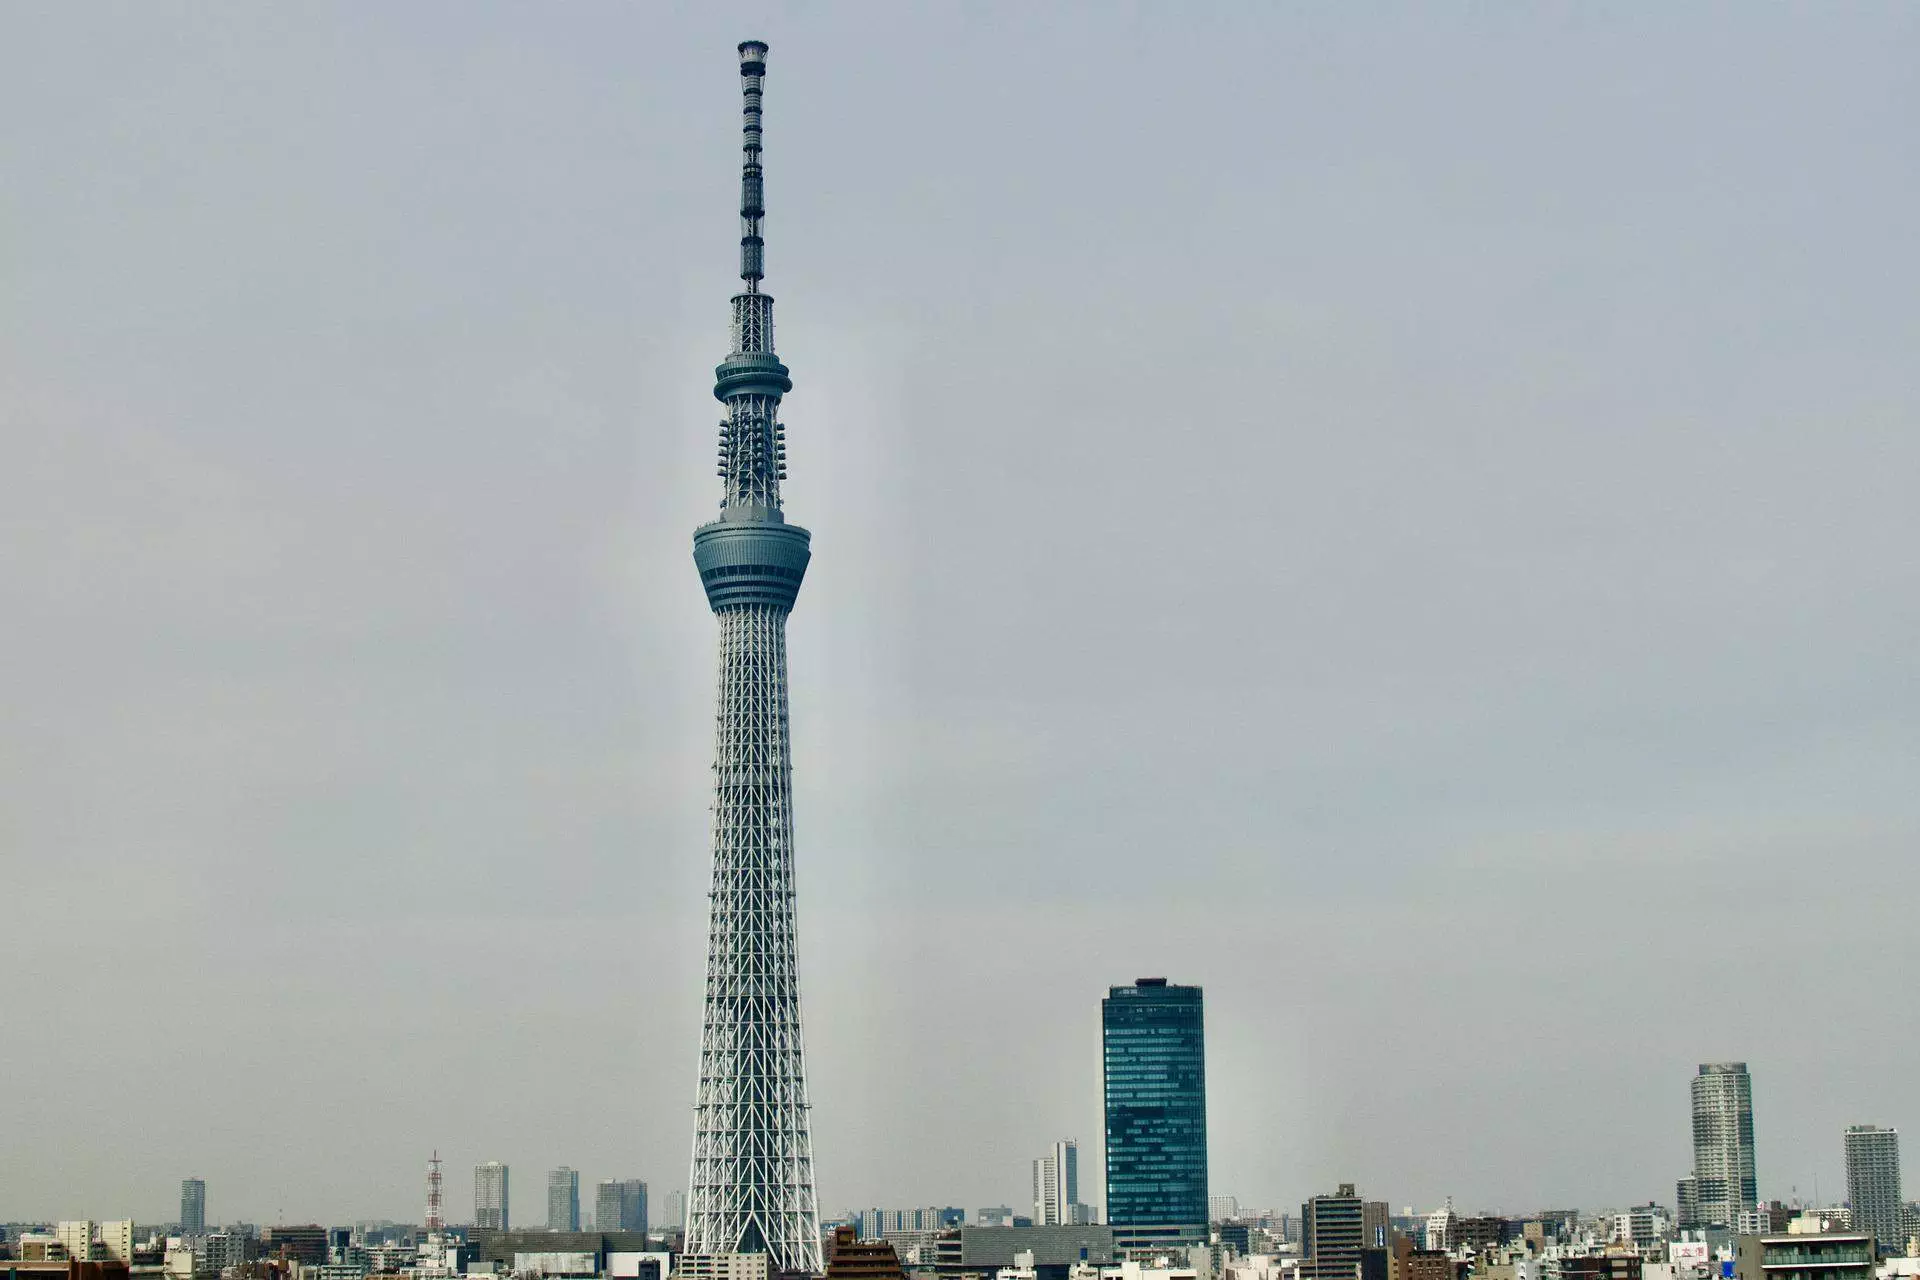 Places in Tokyo, Tokyo Skytree